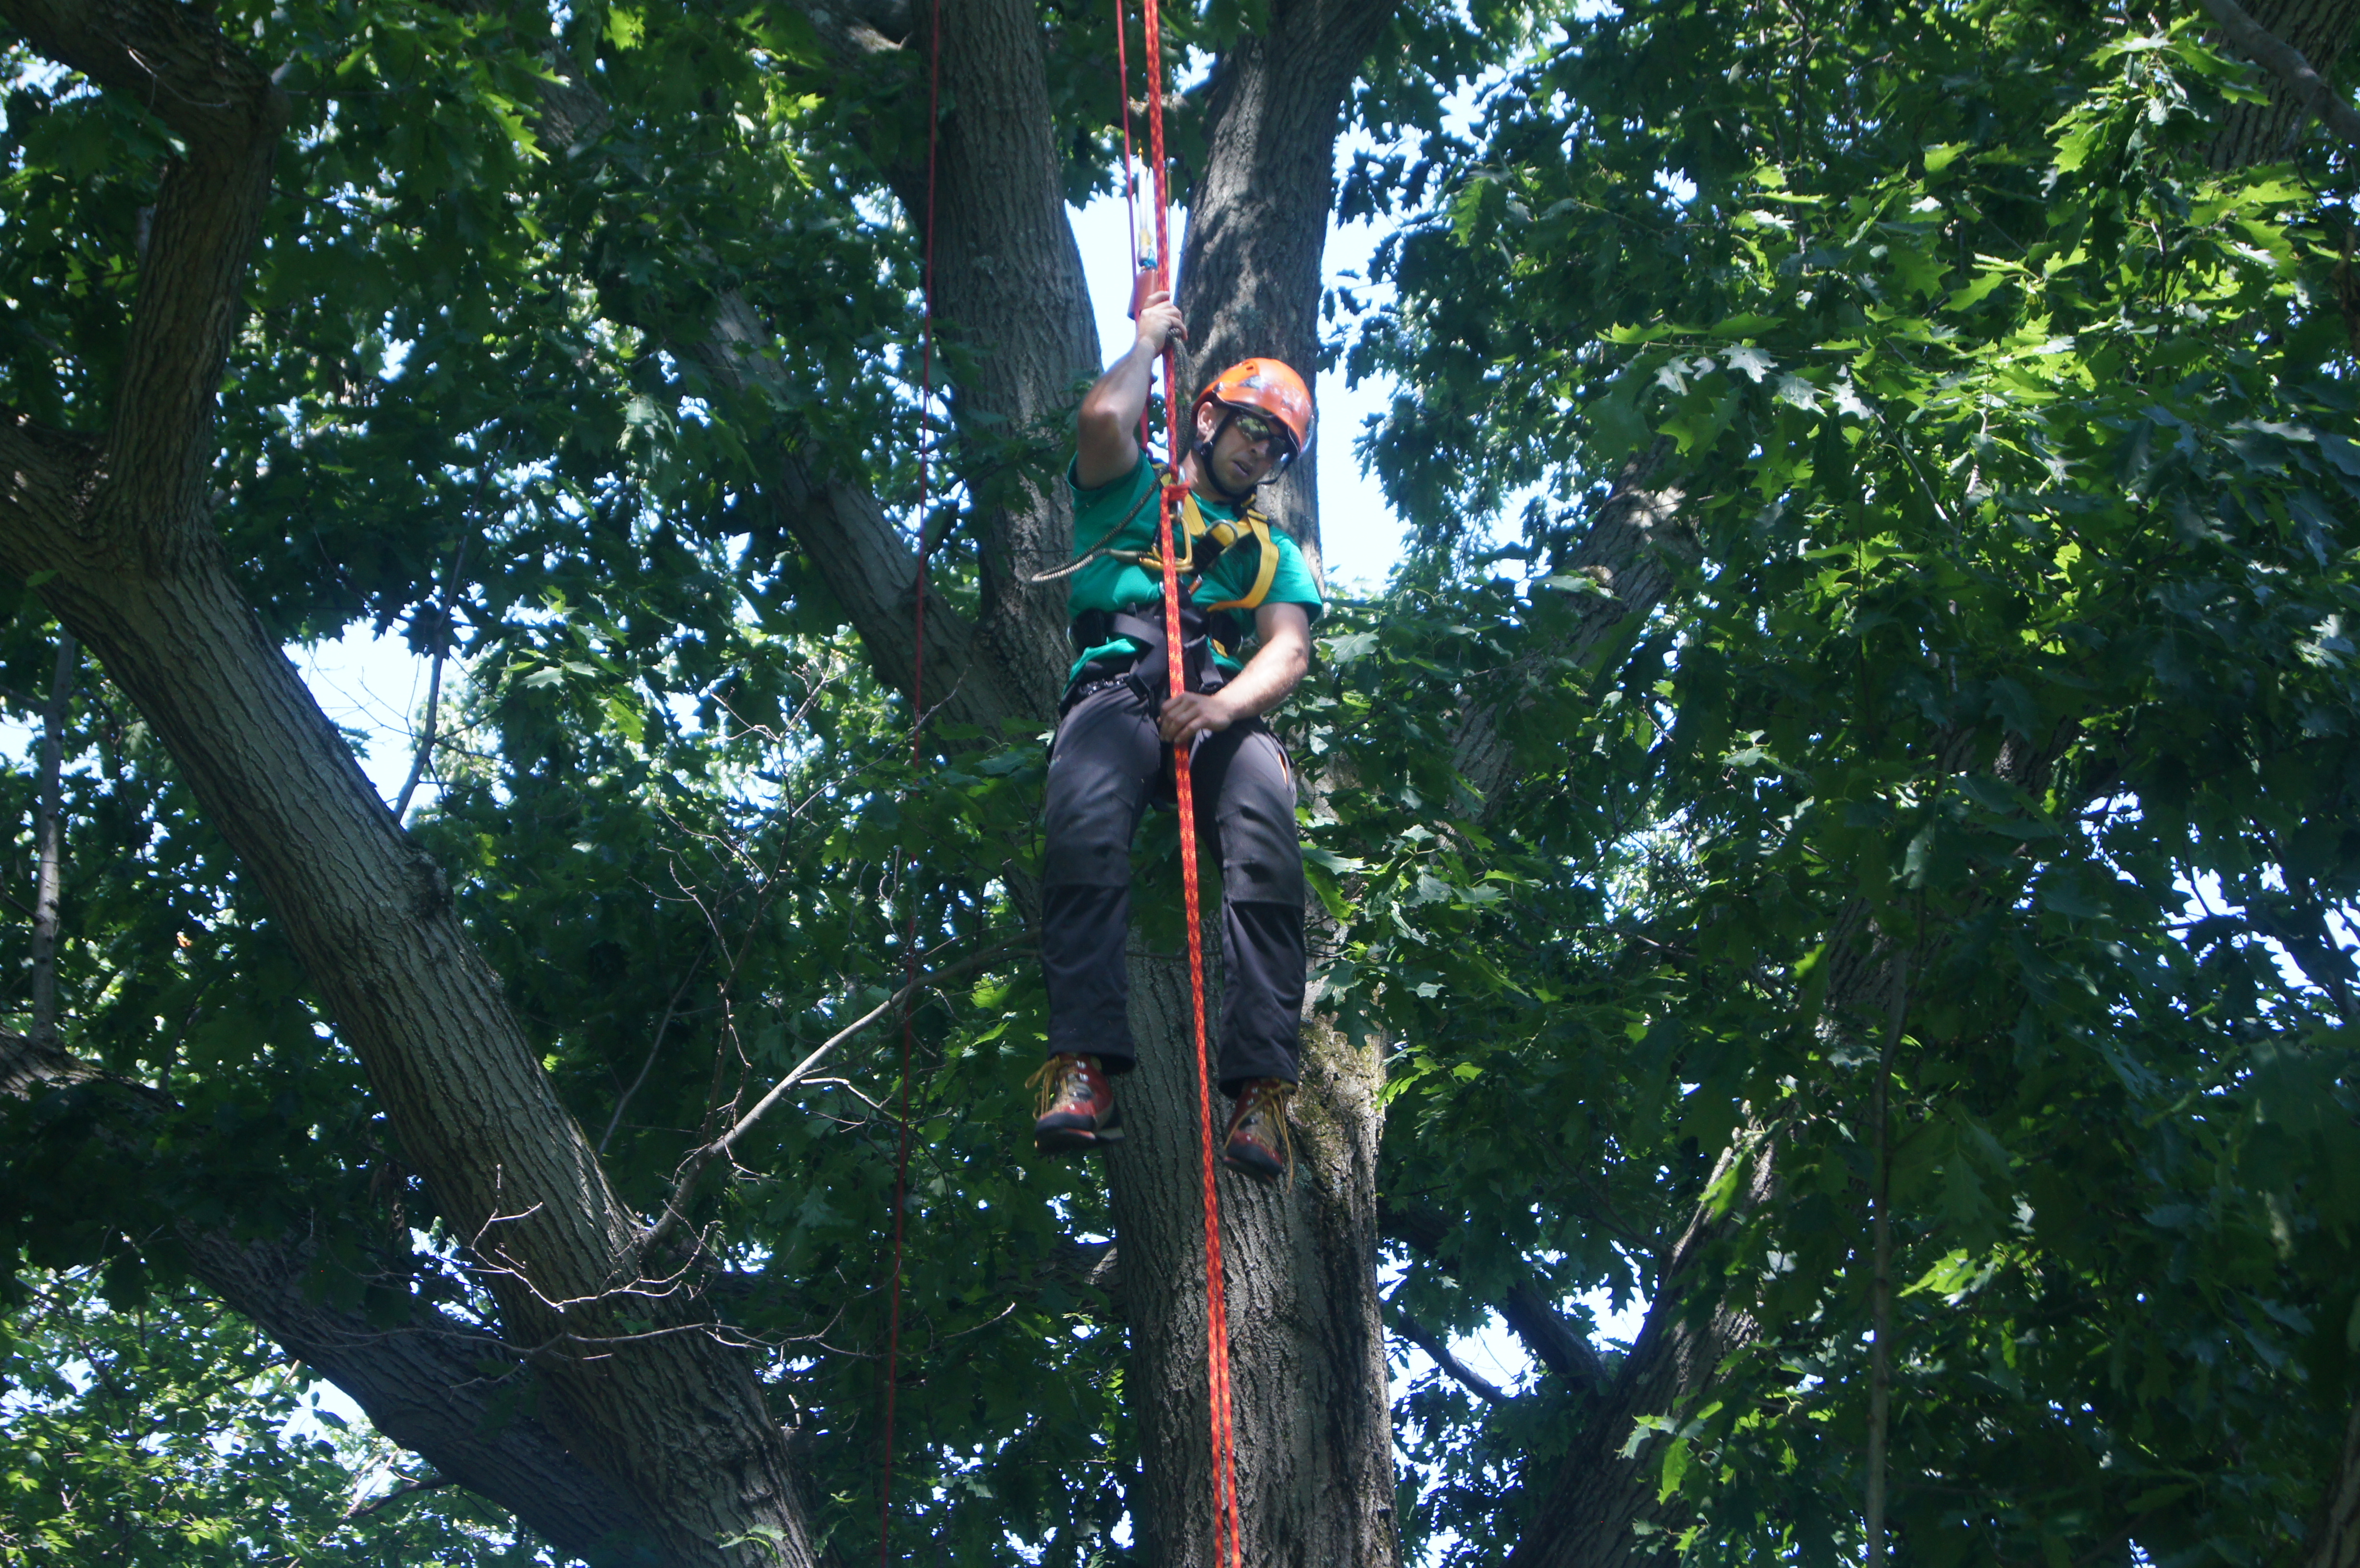 Tree Climbing Championship Competition at the Brooklyn Botanic Garden